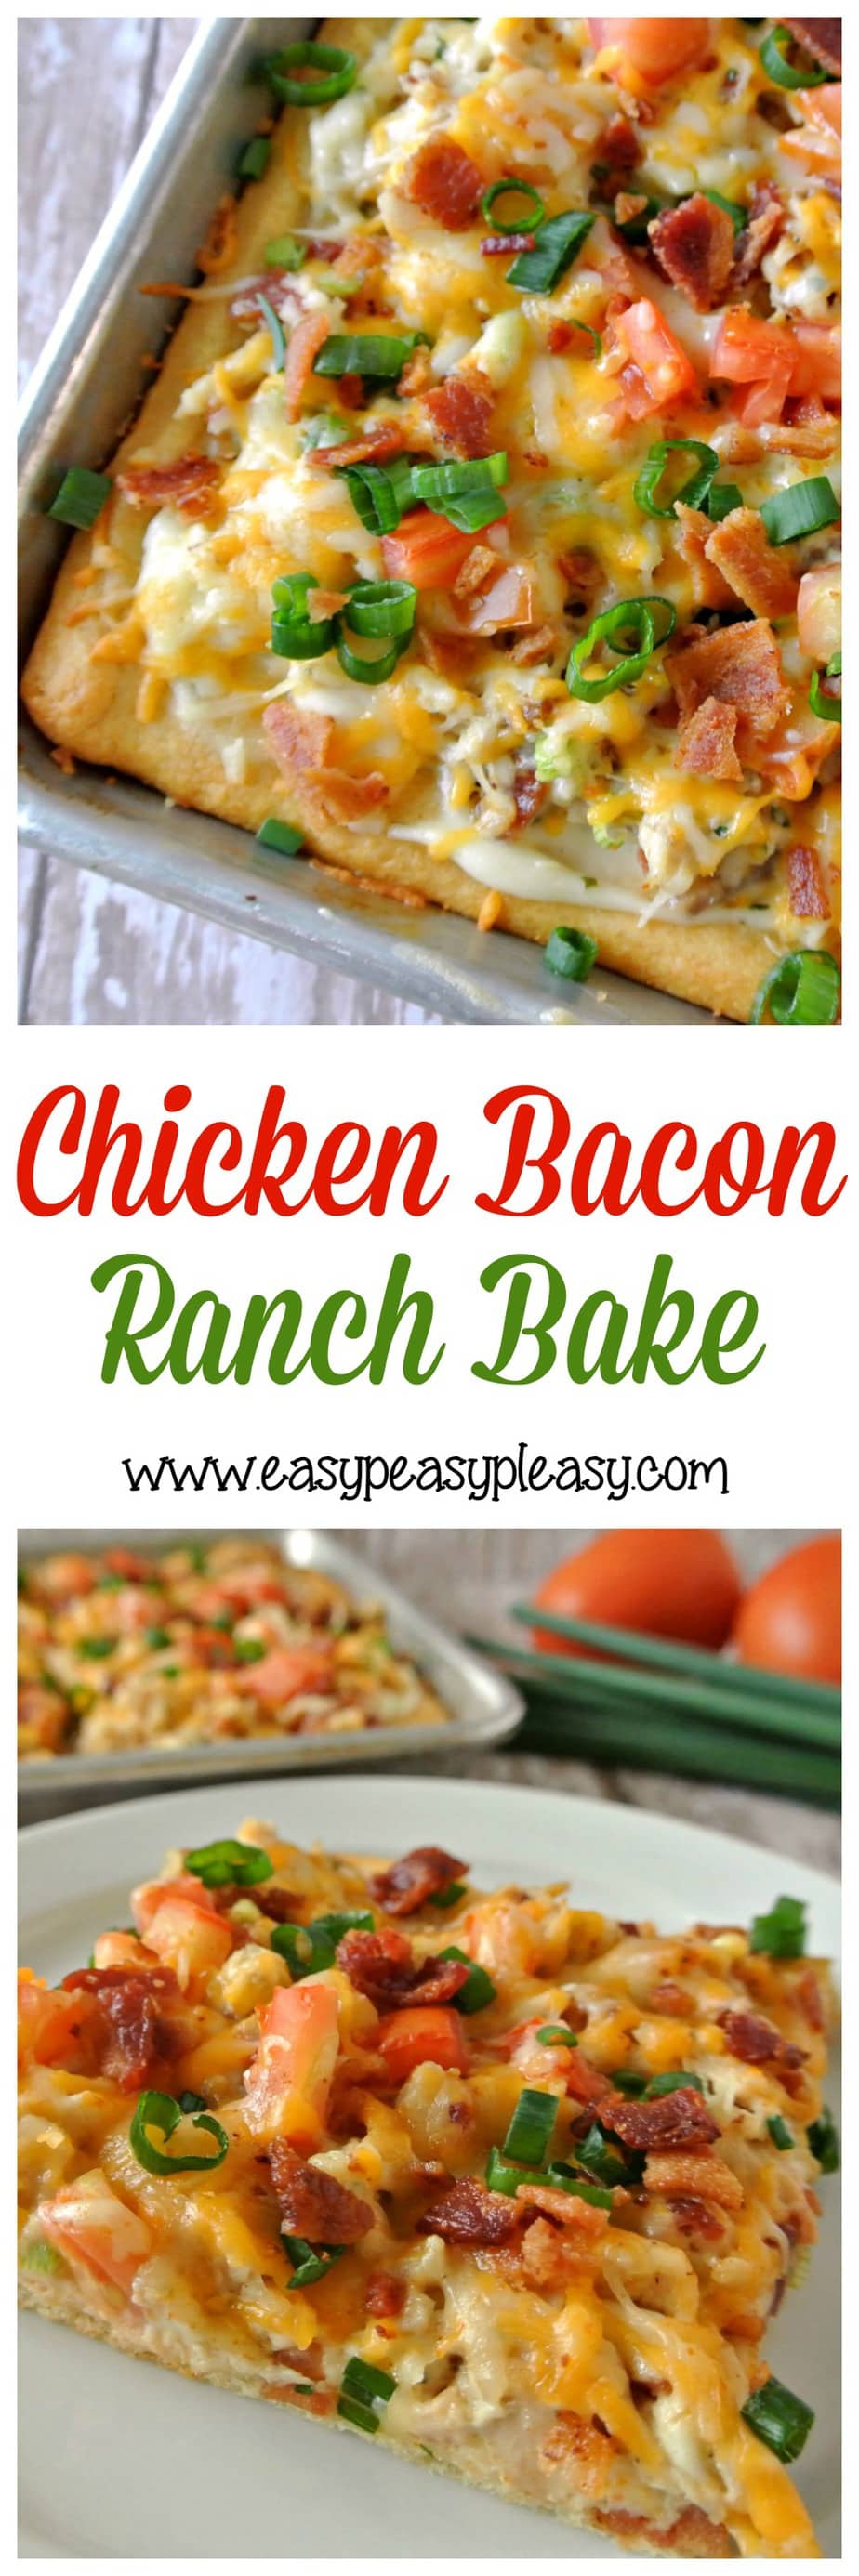 Chicken Bacon Ranch Bake is so easy with the help of a rotisserie chicken and a can of crescent rolls!